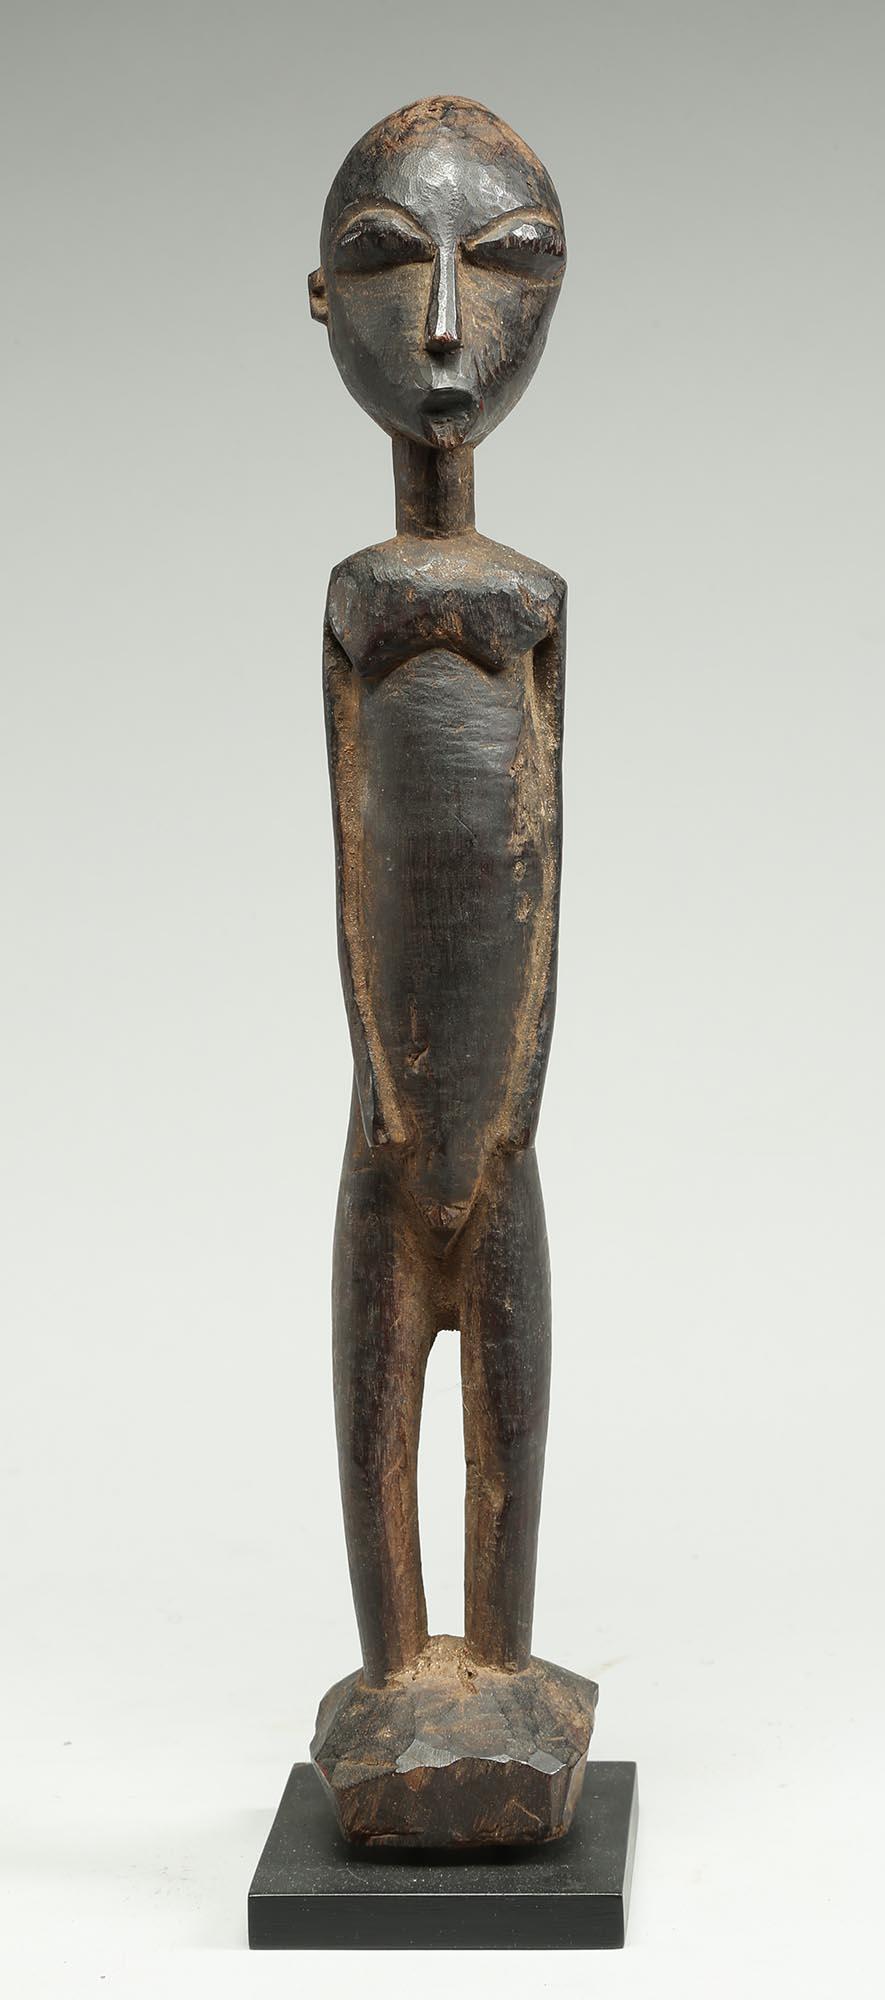 Tall elegant standing Lobi figure with expressive face, simple features, old worn dark patina. Early 20th century Ghana. 14 1/4 inches on custom base. Check all the angles! Long elegant, tapered eyes. Old hole on back of head, probably from opening